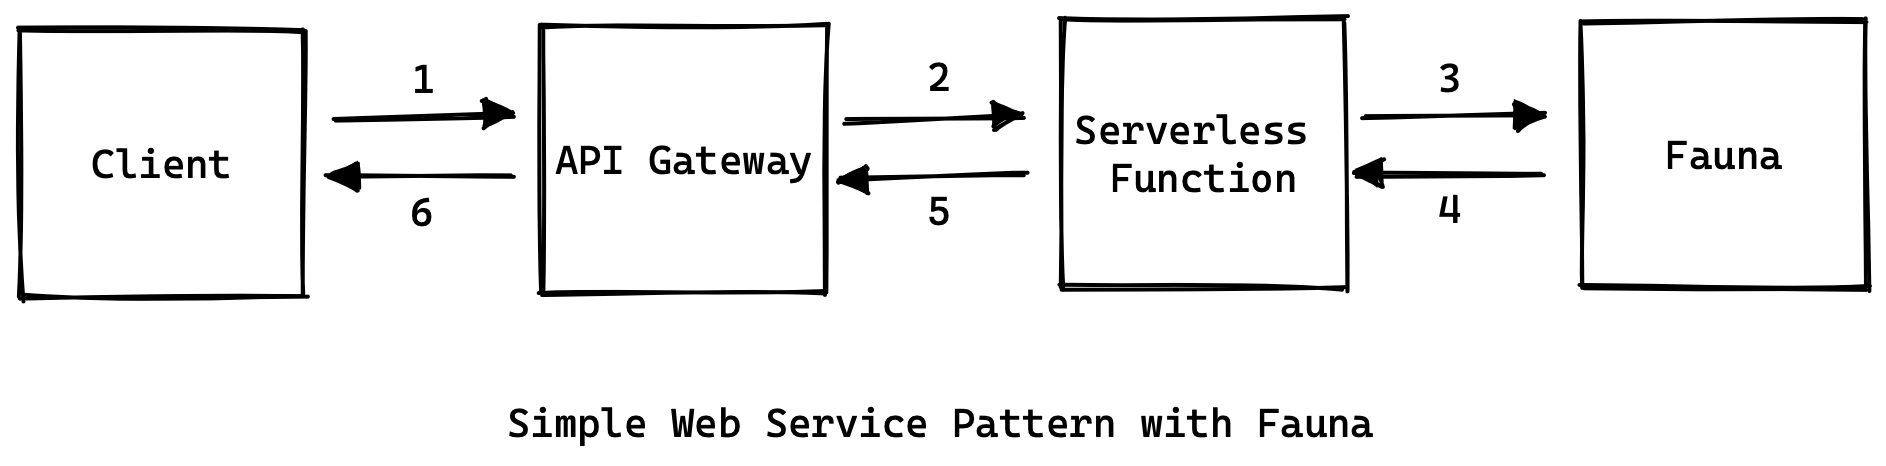 Simple web service pattern with Fauna